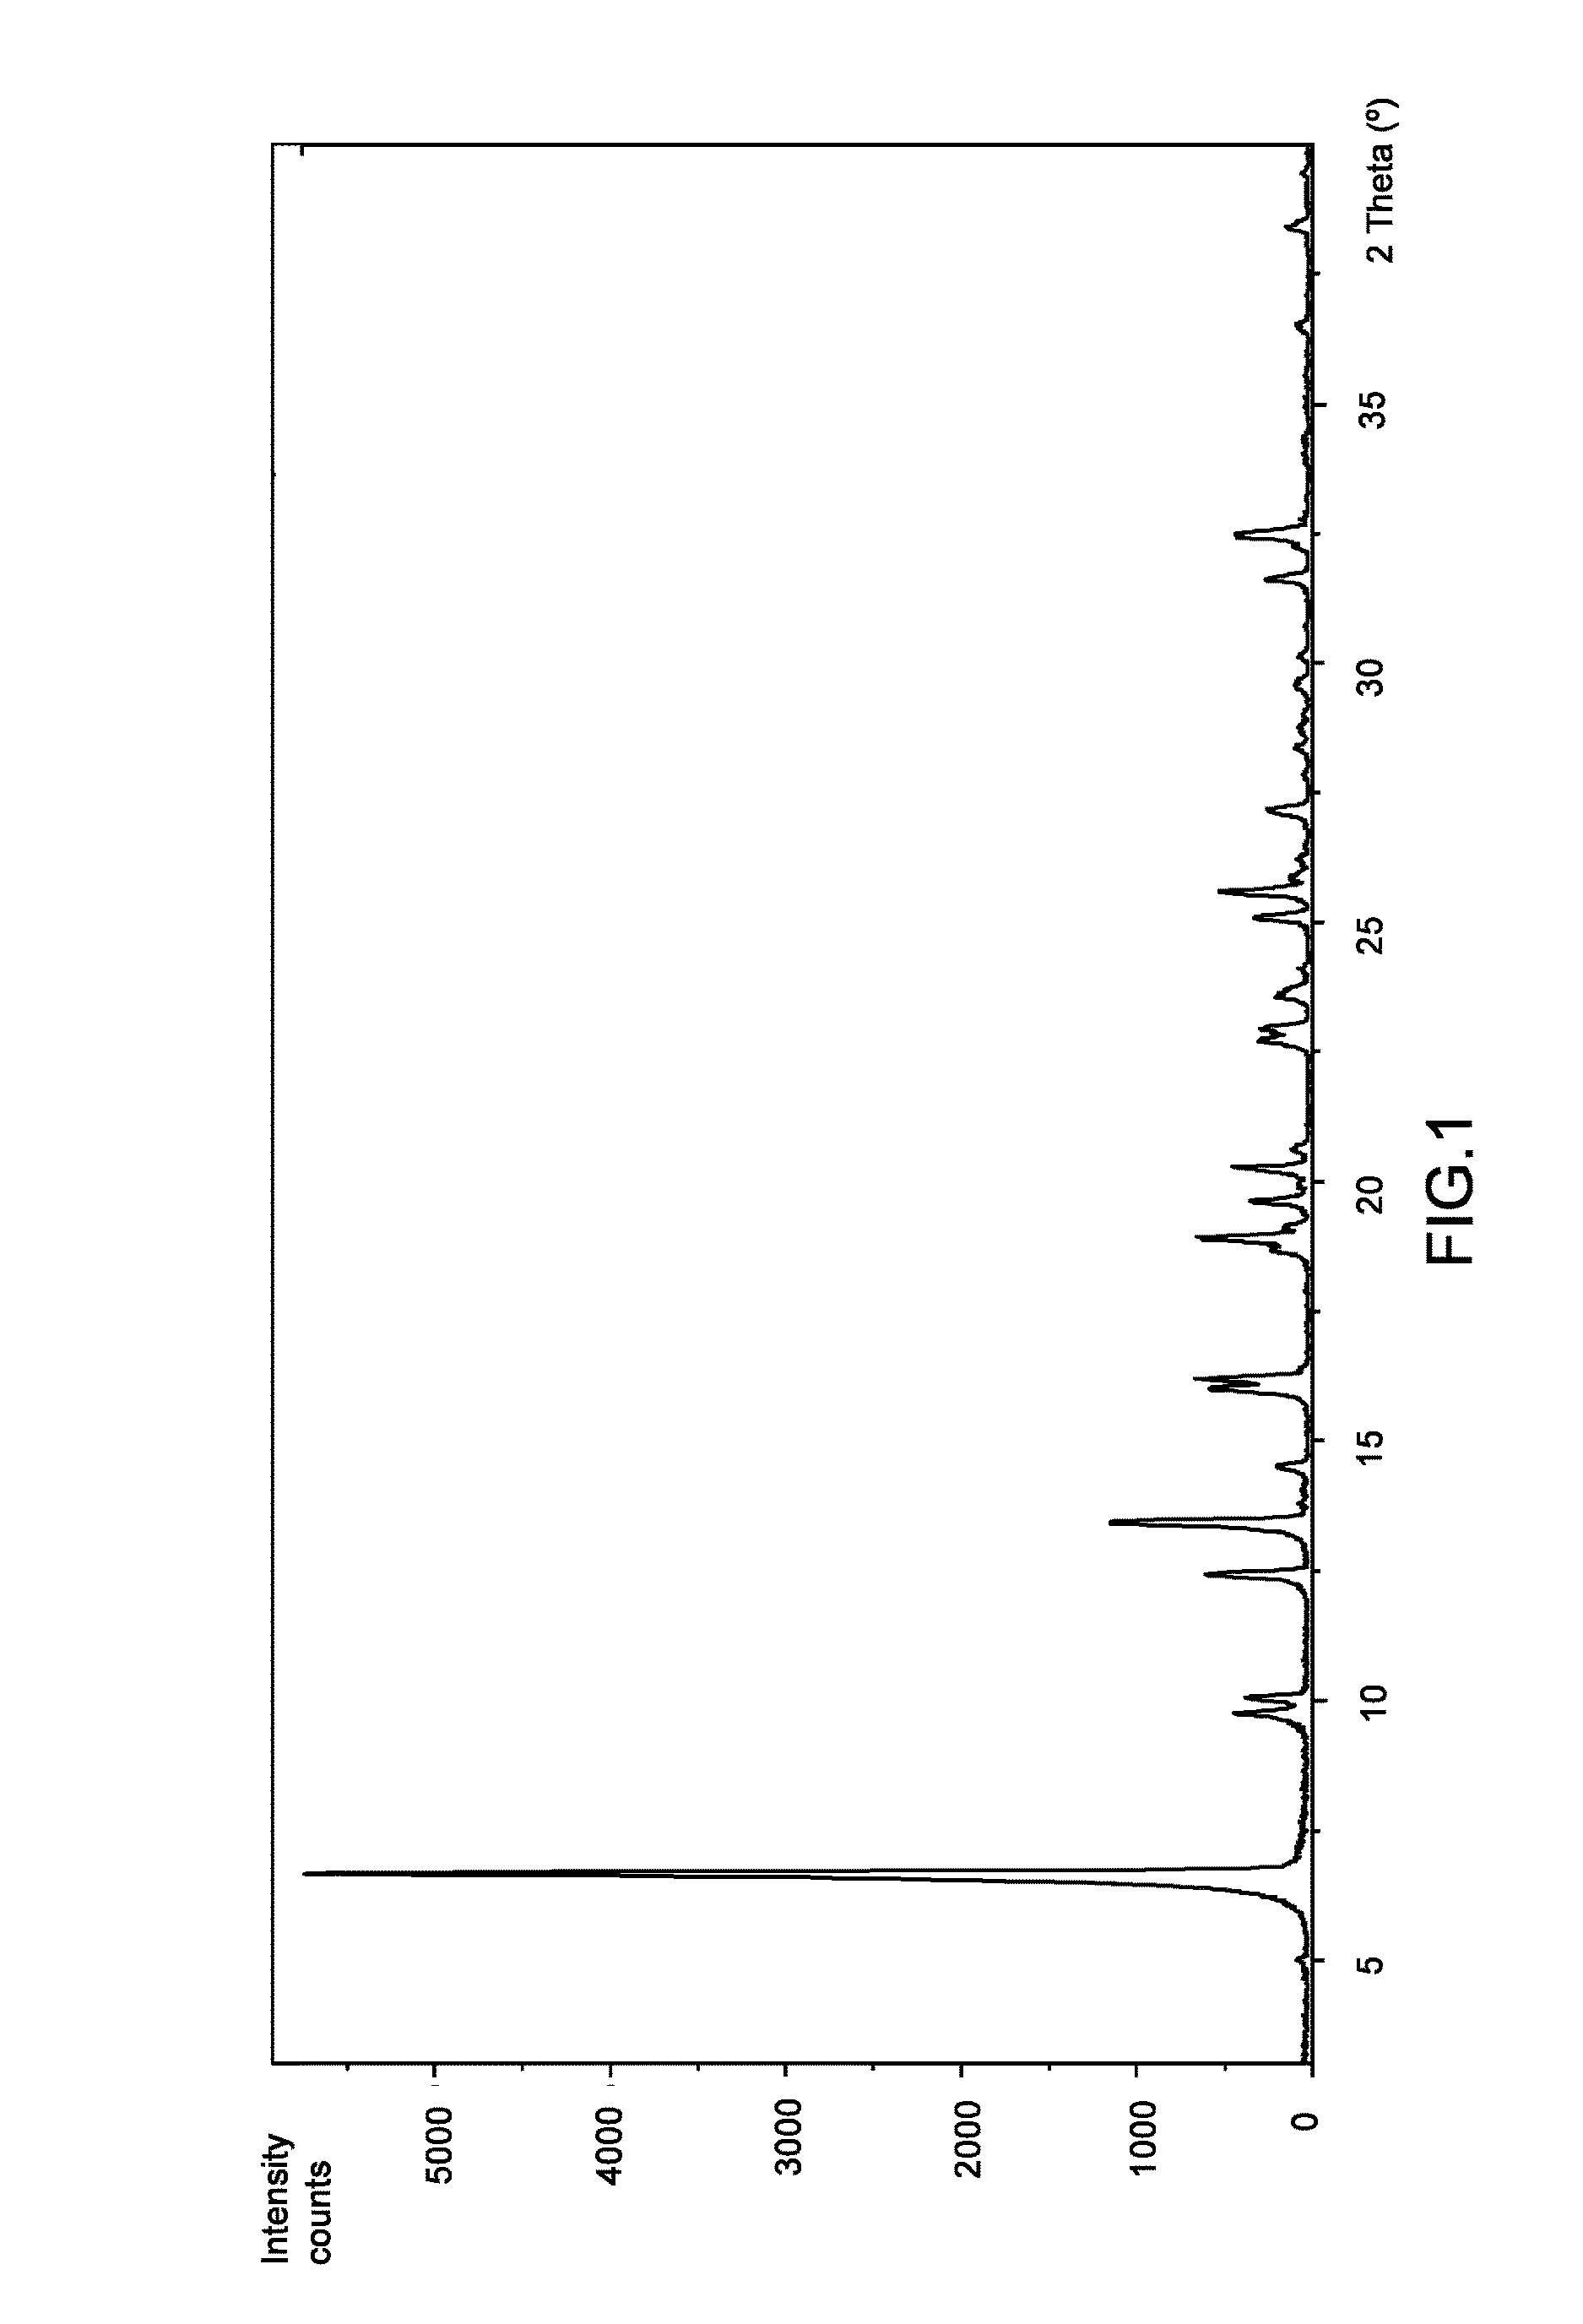 Preparation process of carboxylic acid derivatives and intermediates thereof